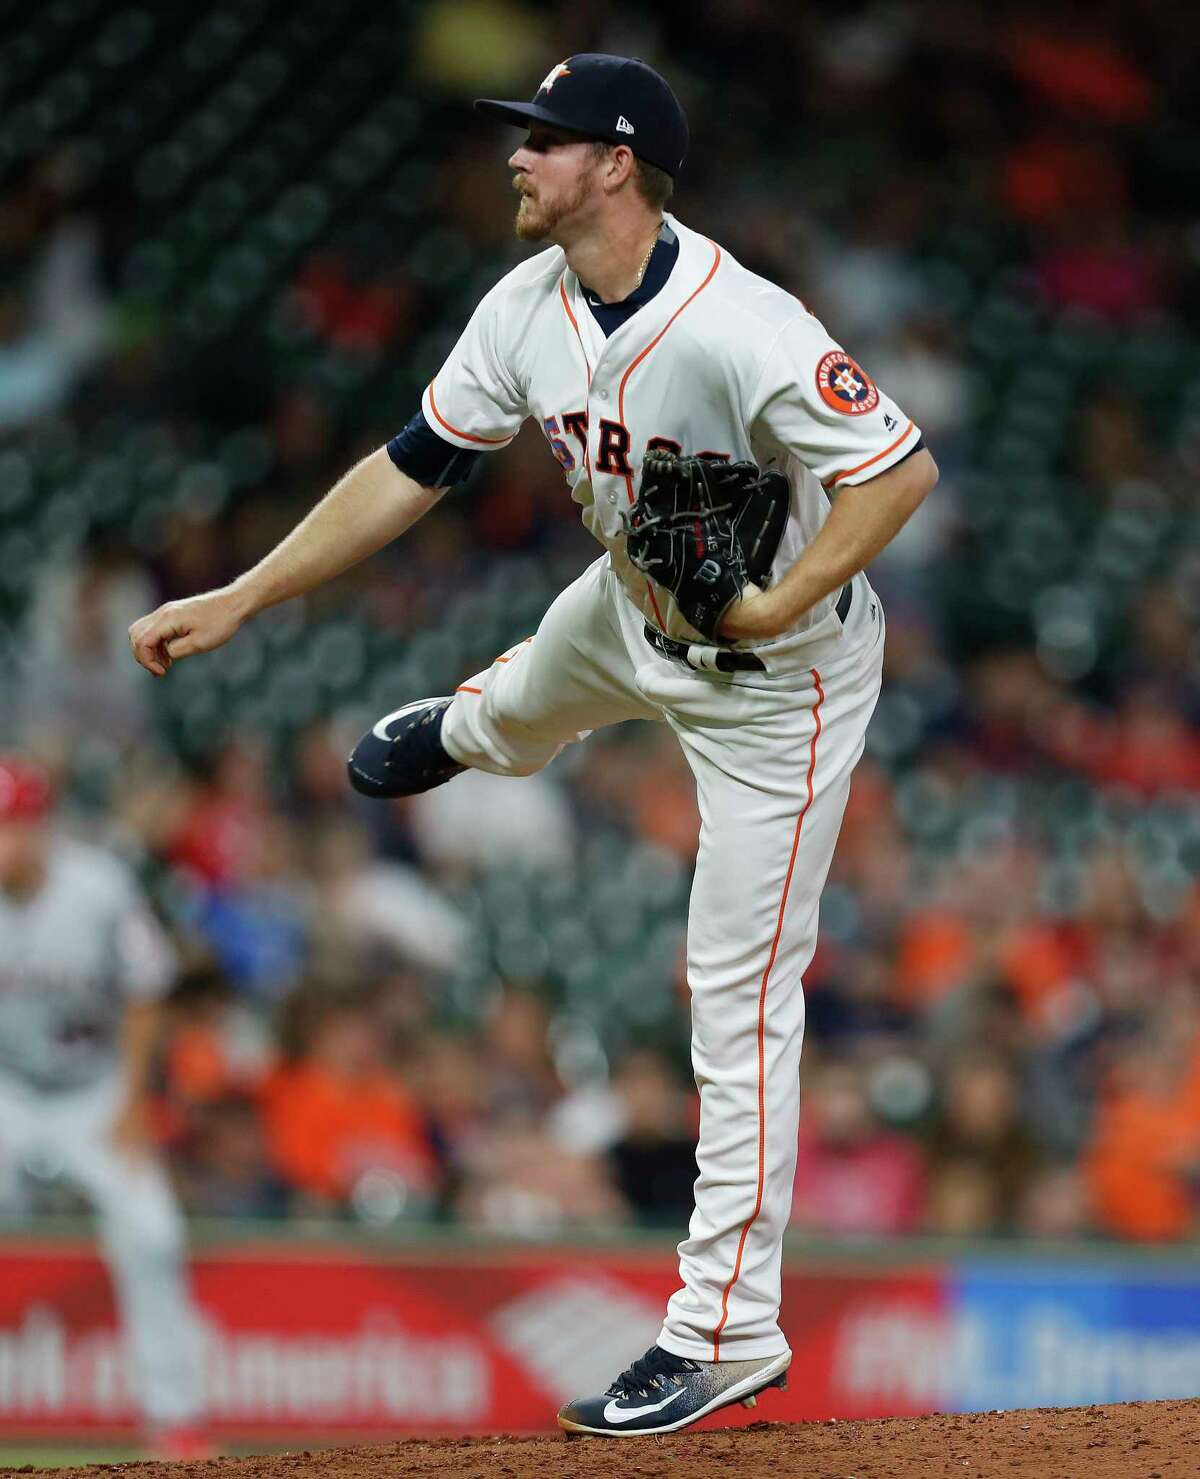 Houston Astros relief pitcher Chris Devenski (47) pitches during the sixth inning of an MLB baseball game at Minute Maid Park, 2017, in Houston.